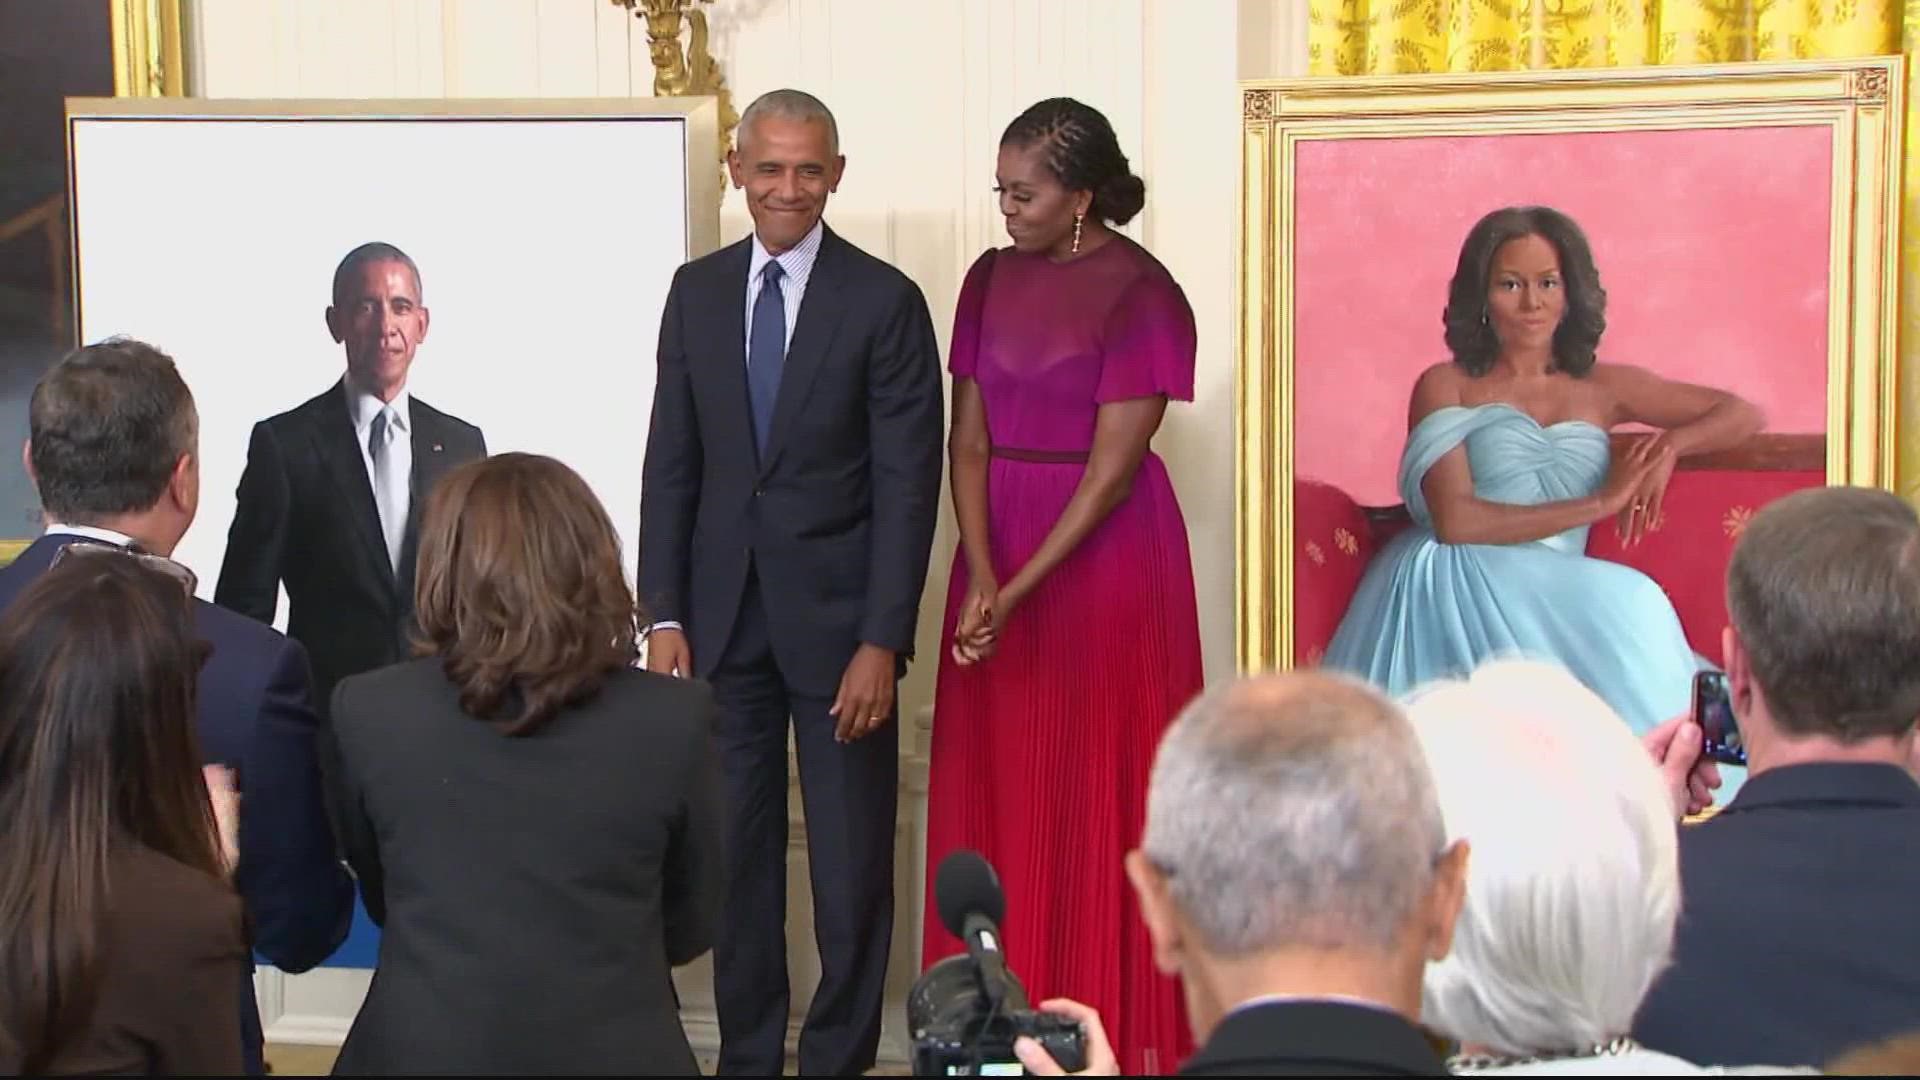 The former first couple were there for the unveiling of their official White House portraits